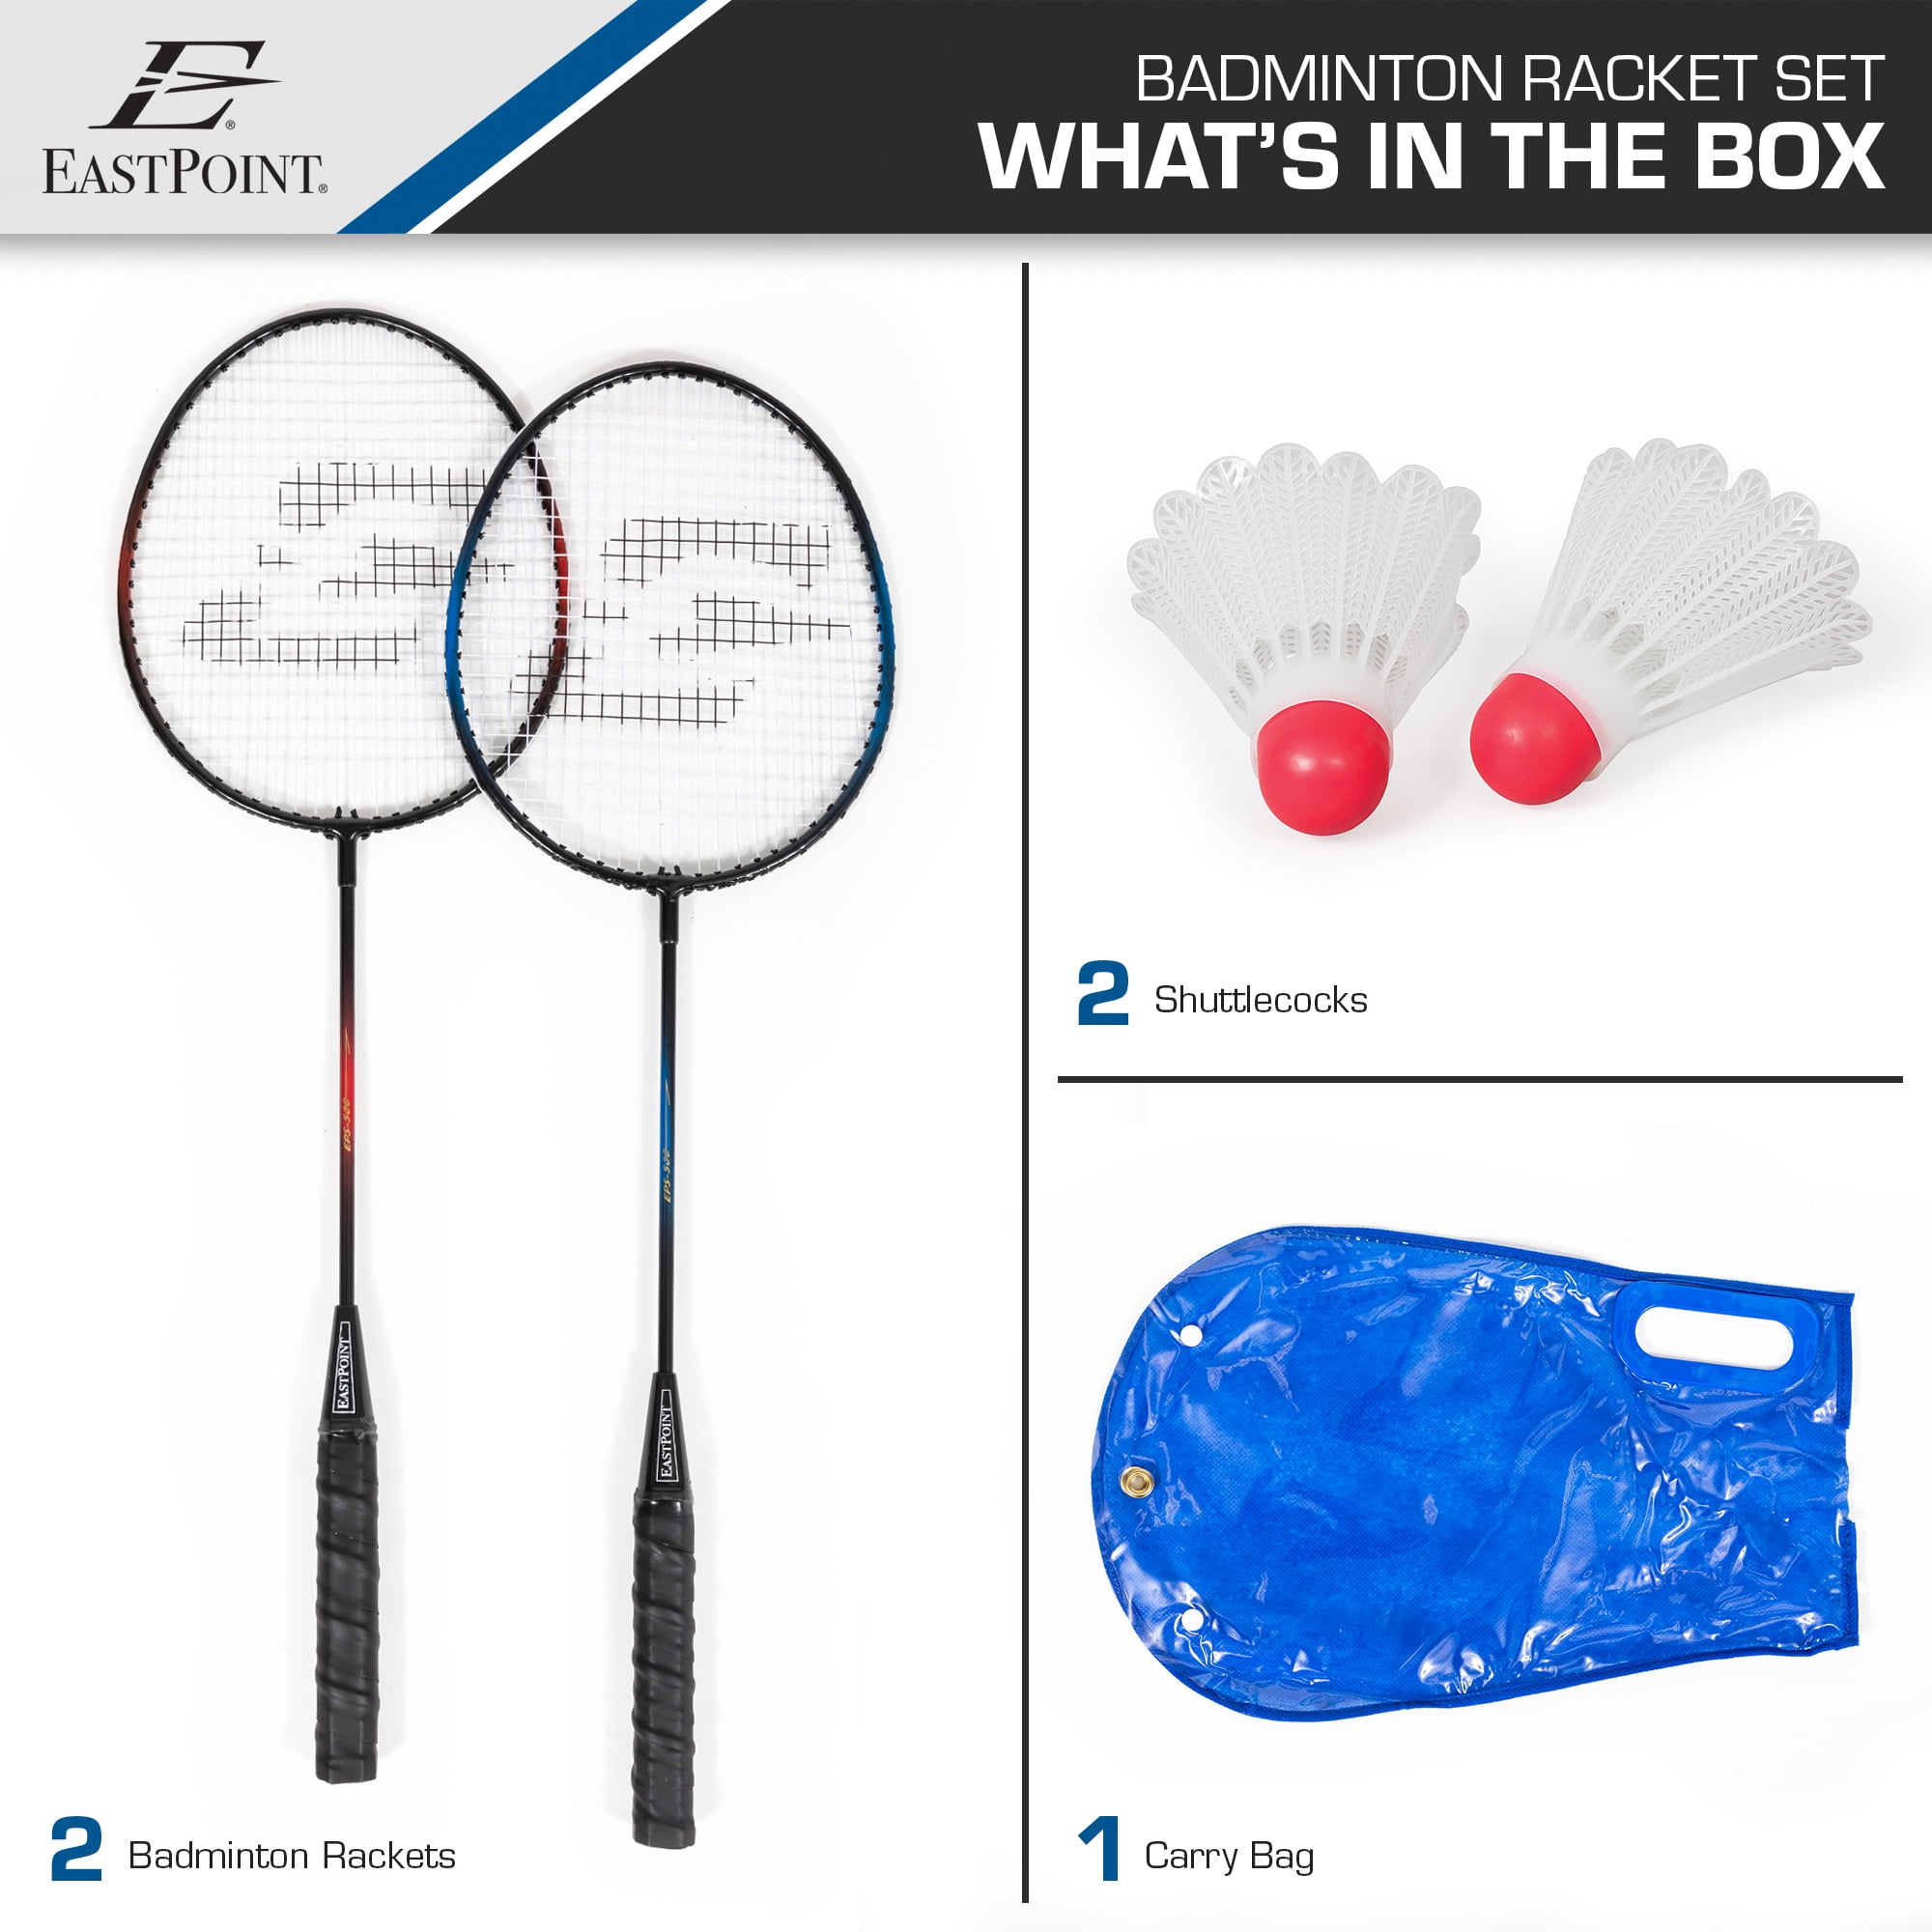 LOC TUB L 2 EastPoint Sports 2-Player Badminton Racket Set for Outdoor Play 